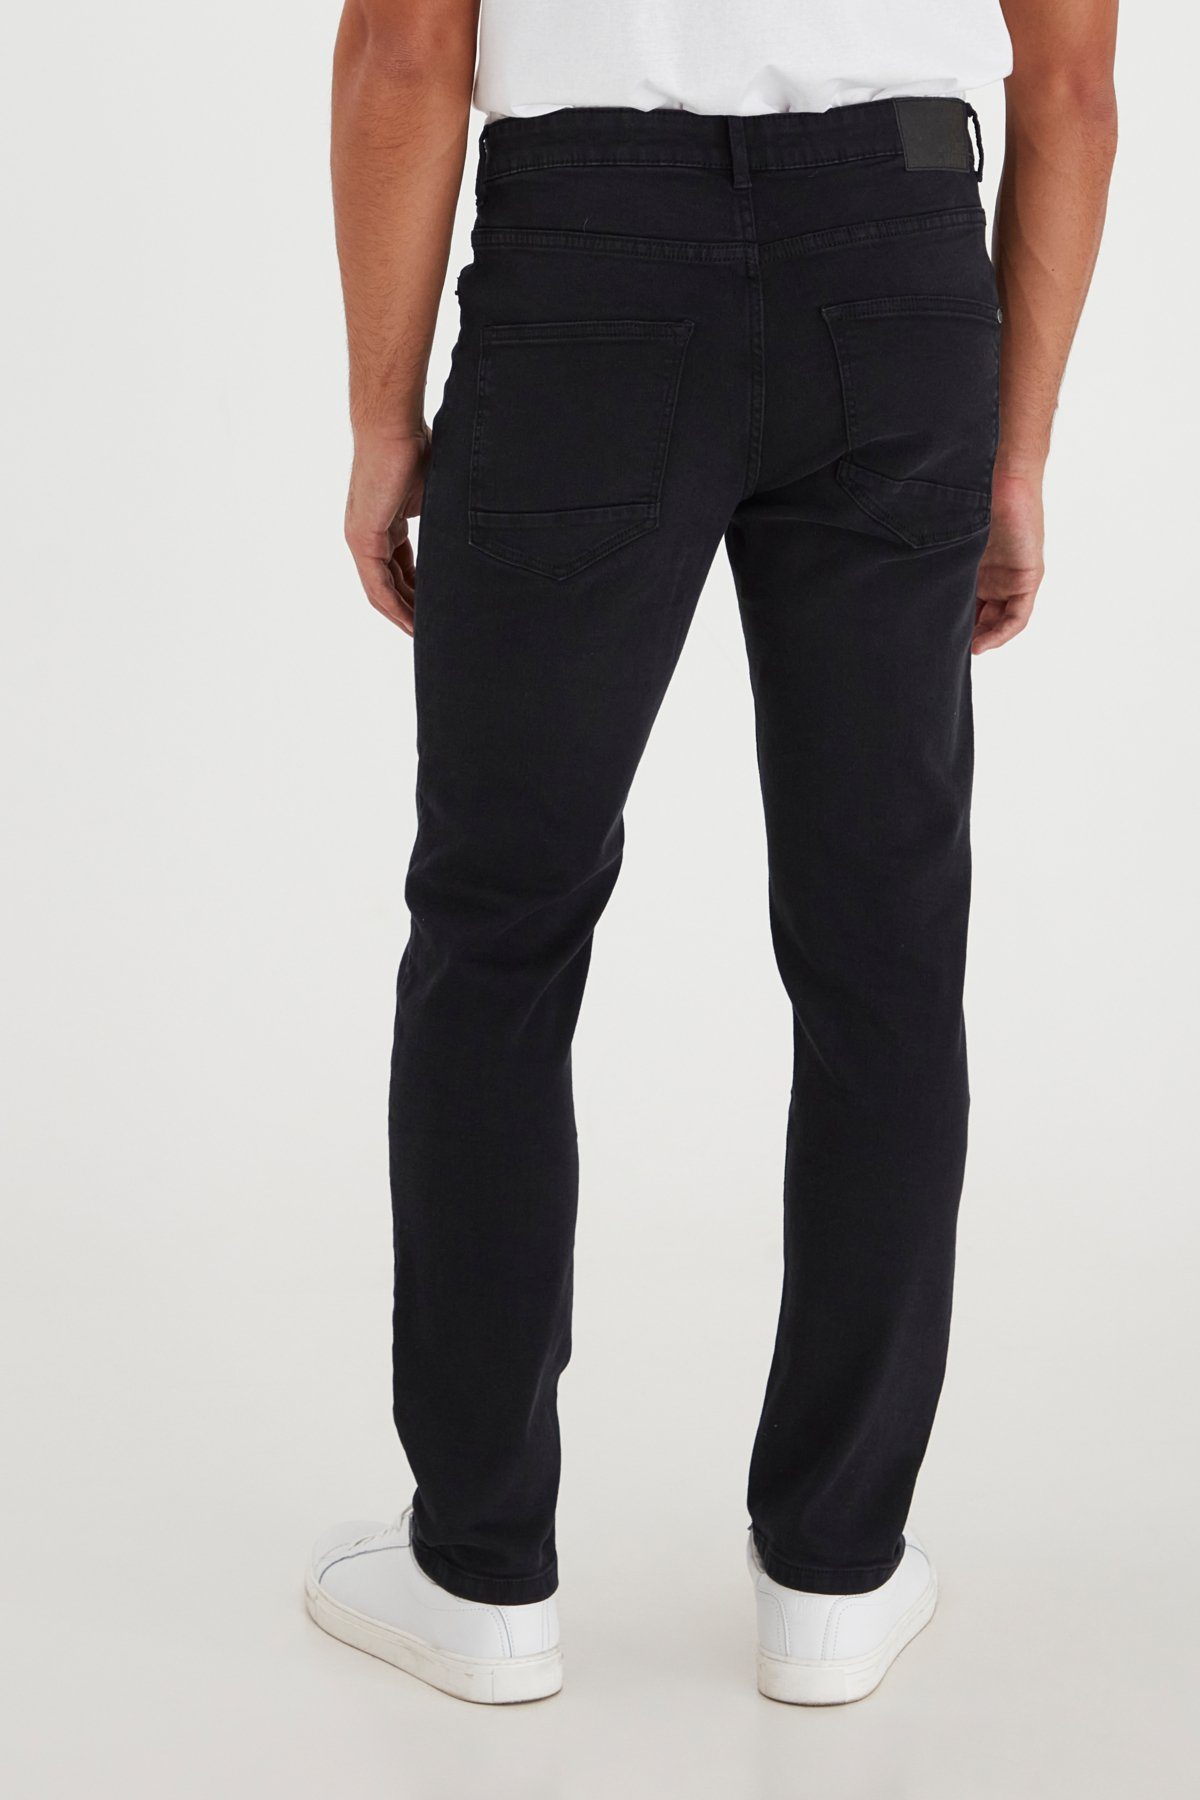 !Solid Black Ryder 100 Jeans Straight-Jeans !SOLID